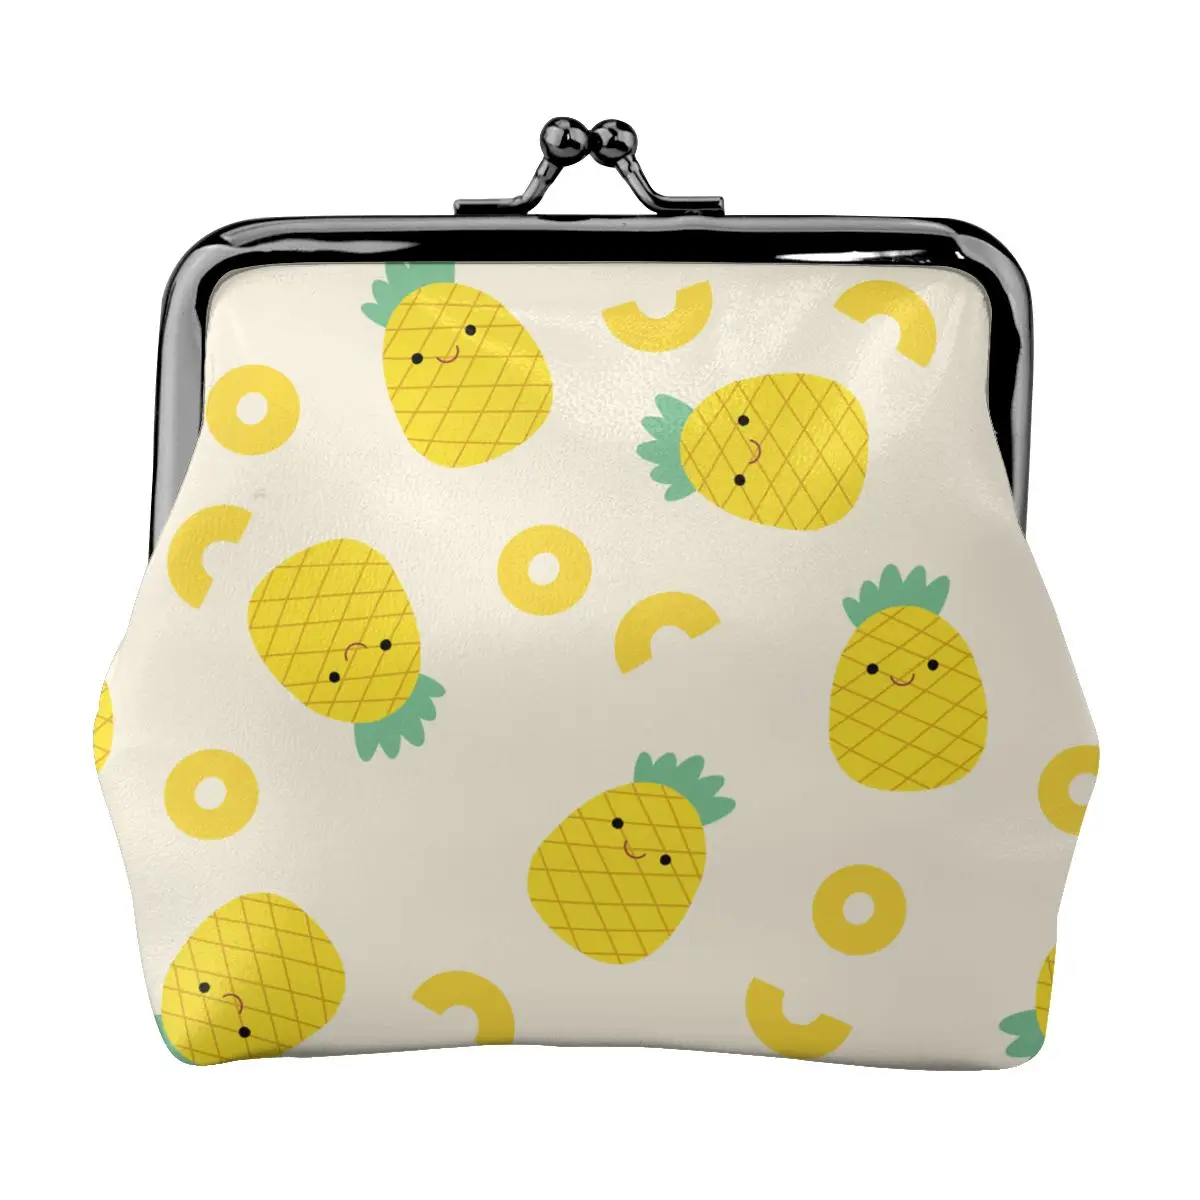 Women's Wallet Short Coin Purse Wallets For Woman Card Holder Pineapple And Pineapple Rings